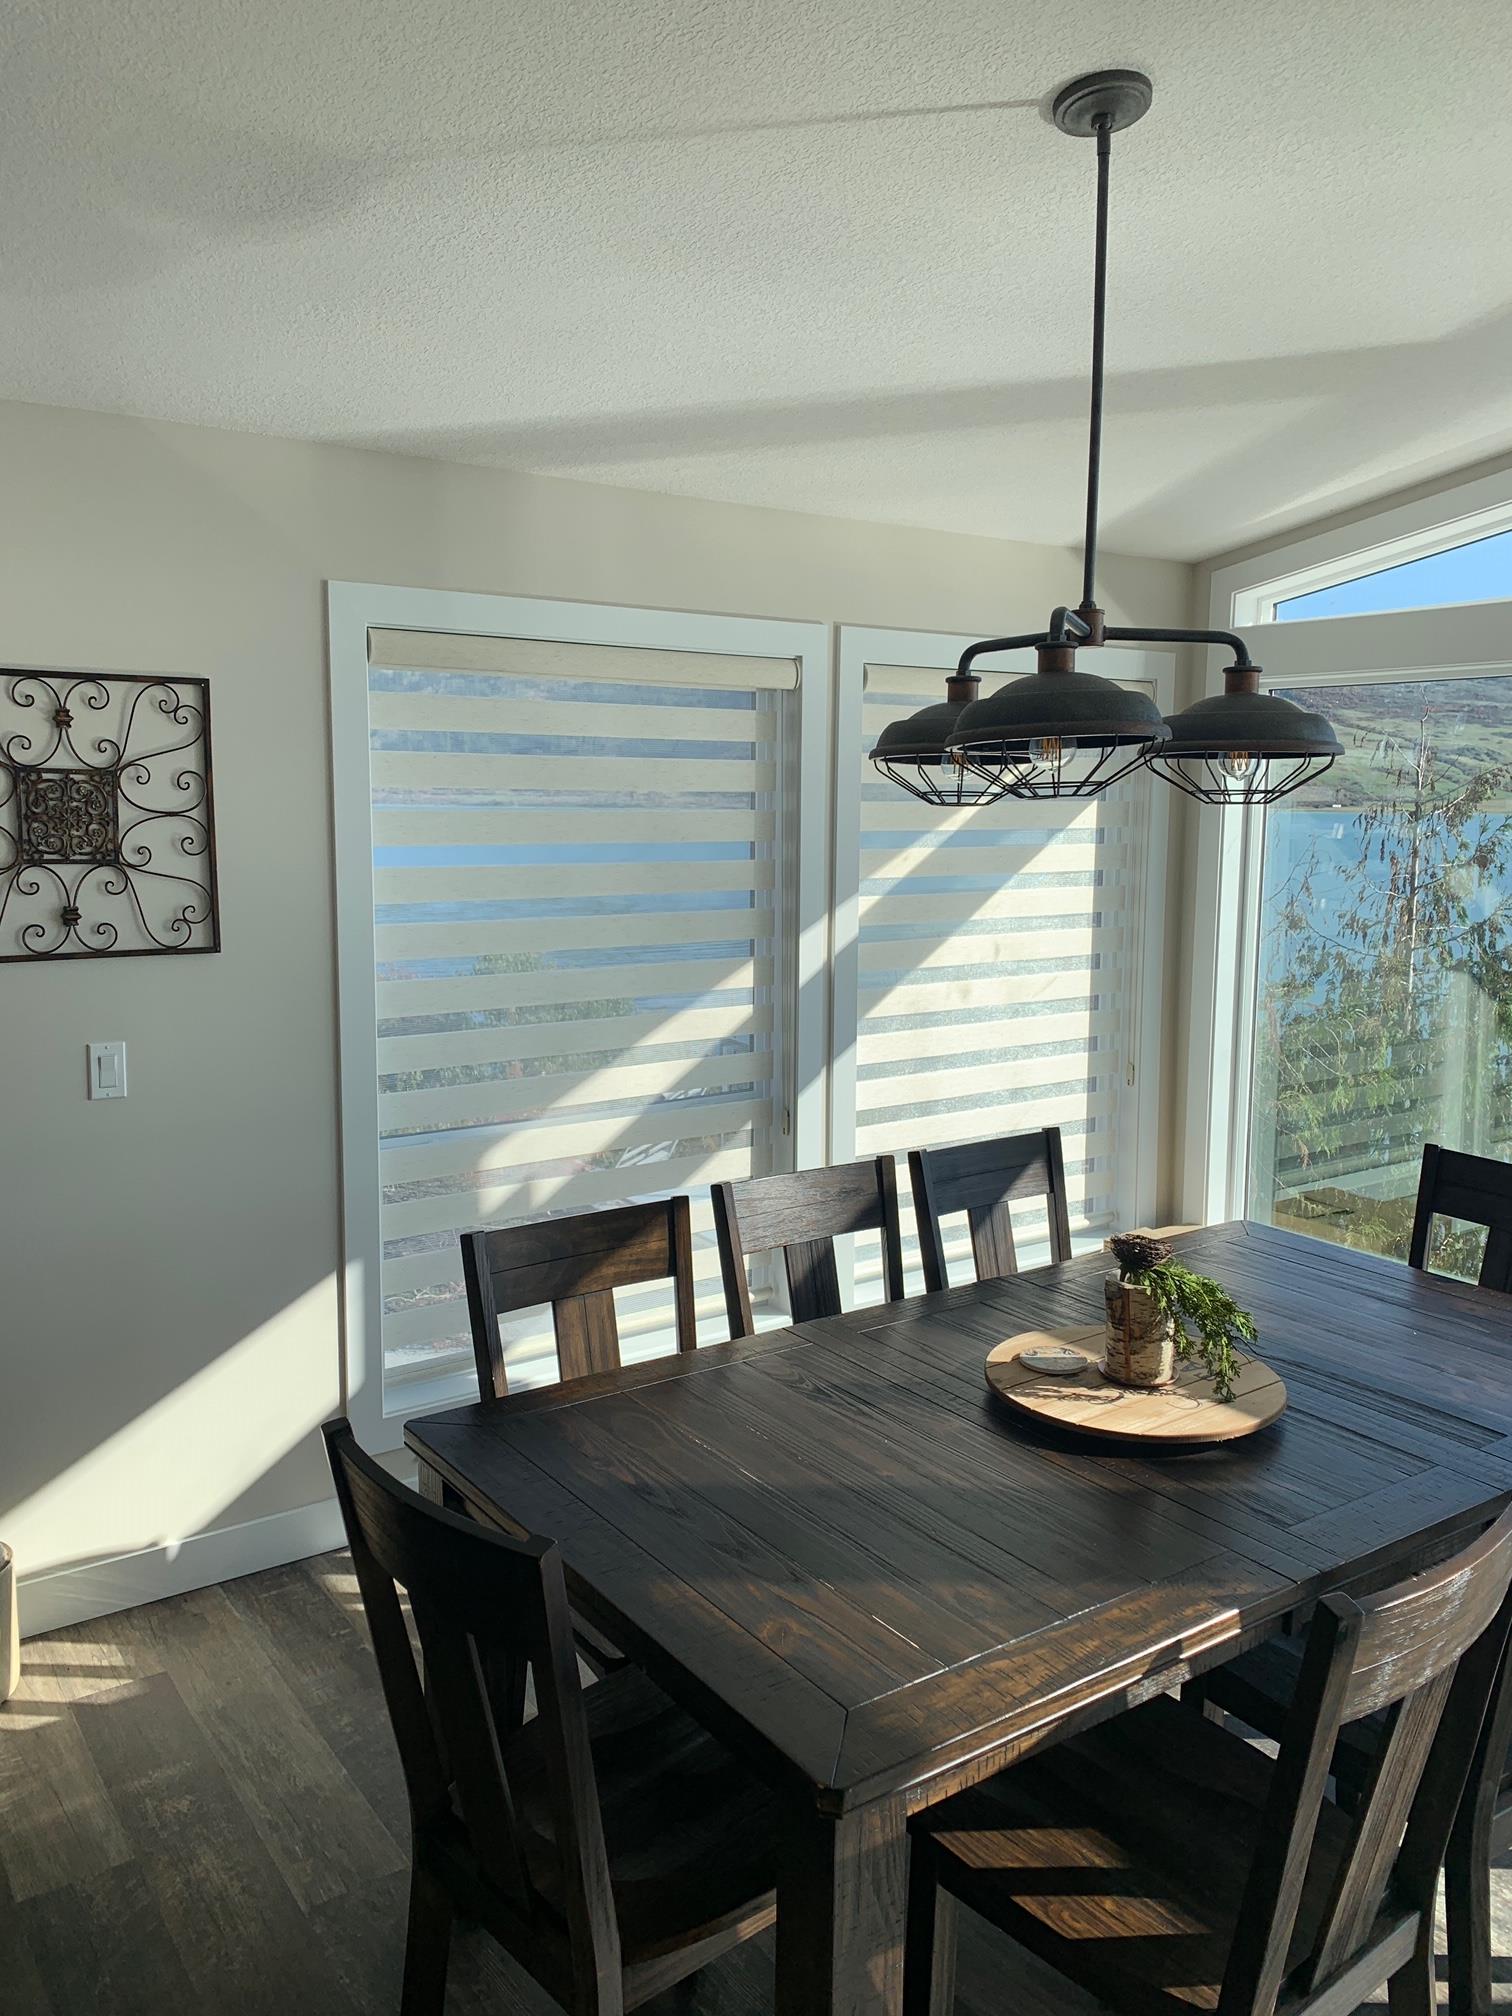 Budget Blinds of Vernon Vernon (250)275-2735